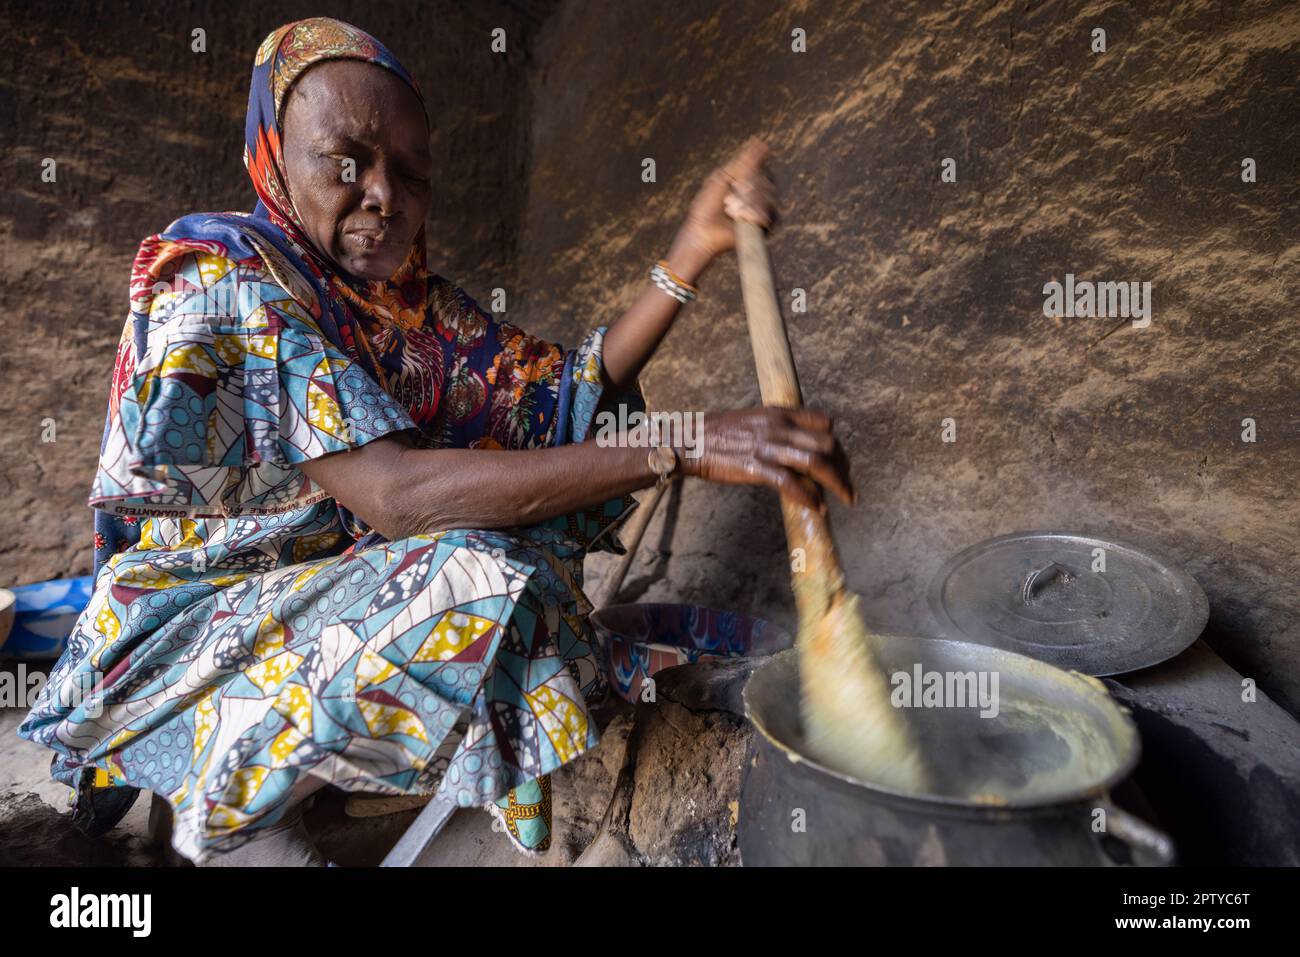 An elderly woman cooks a traditional meal of millet paste over a fire in Segou Region, Mali, West Africa. 2022 Mali drought and hunger crisis. Stock Photo